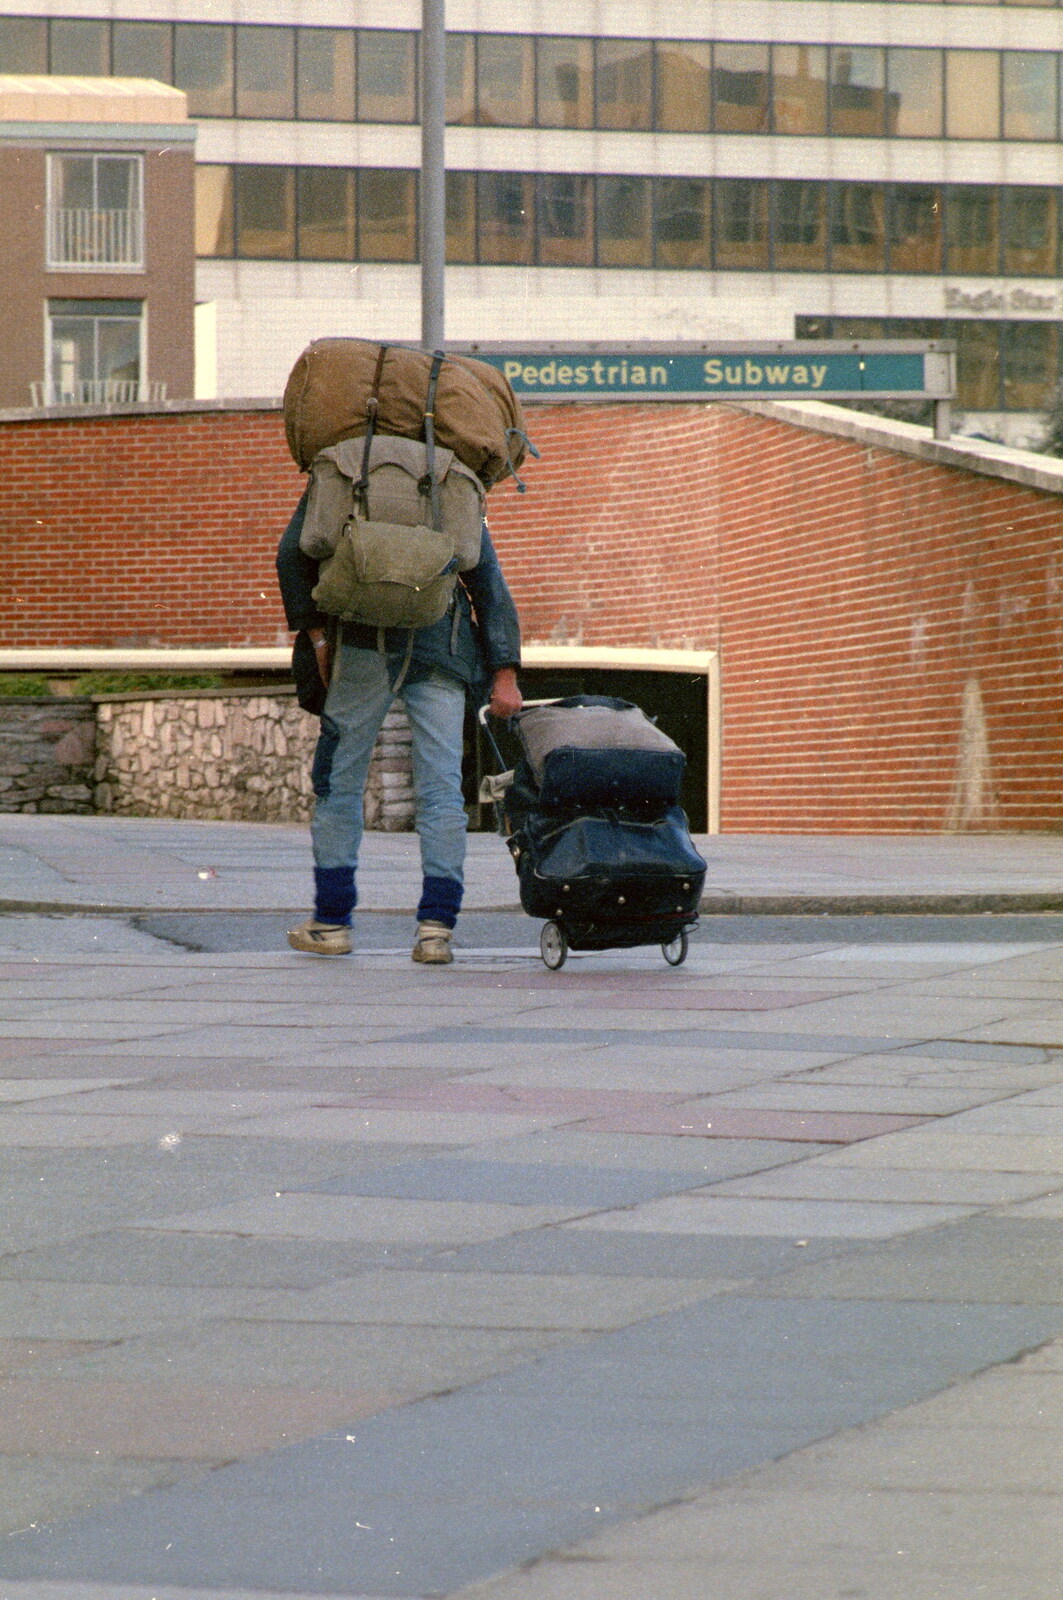 The tramp whose whole life is in a rucksack and trolley from Uni: A Plymouth Hoe Panorama, Plymouth, Devon - 7th May 1986